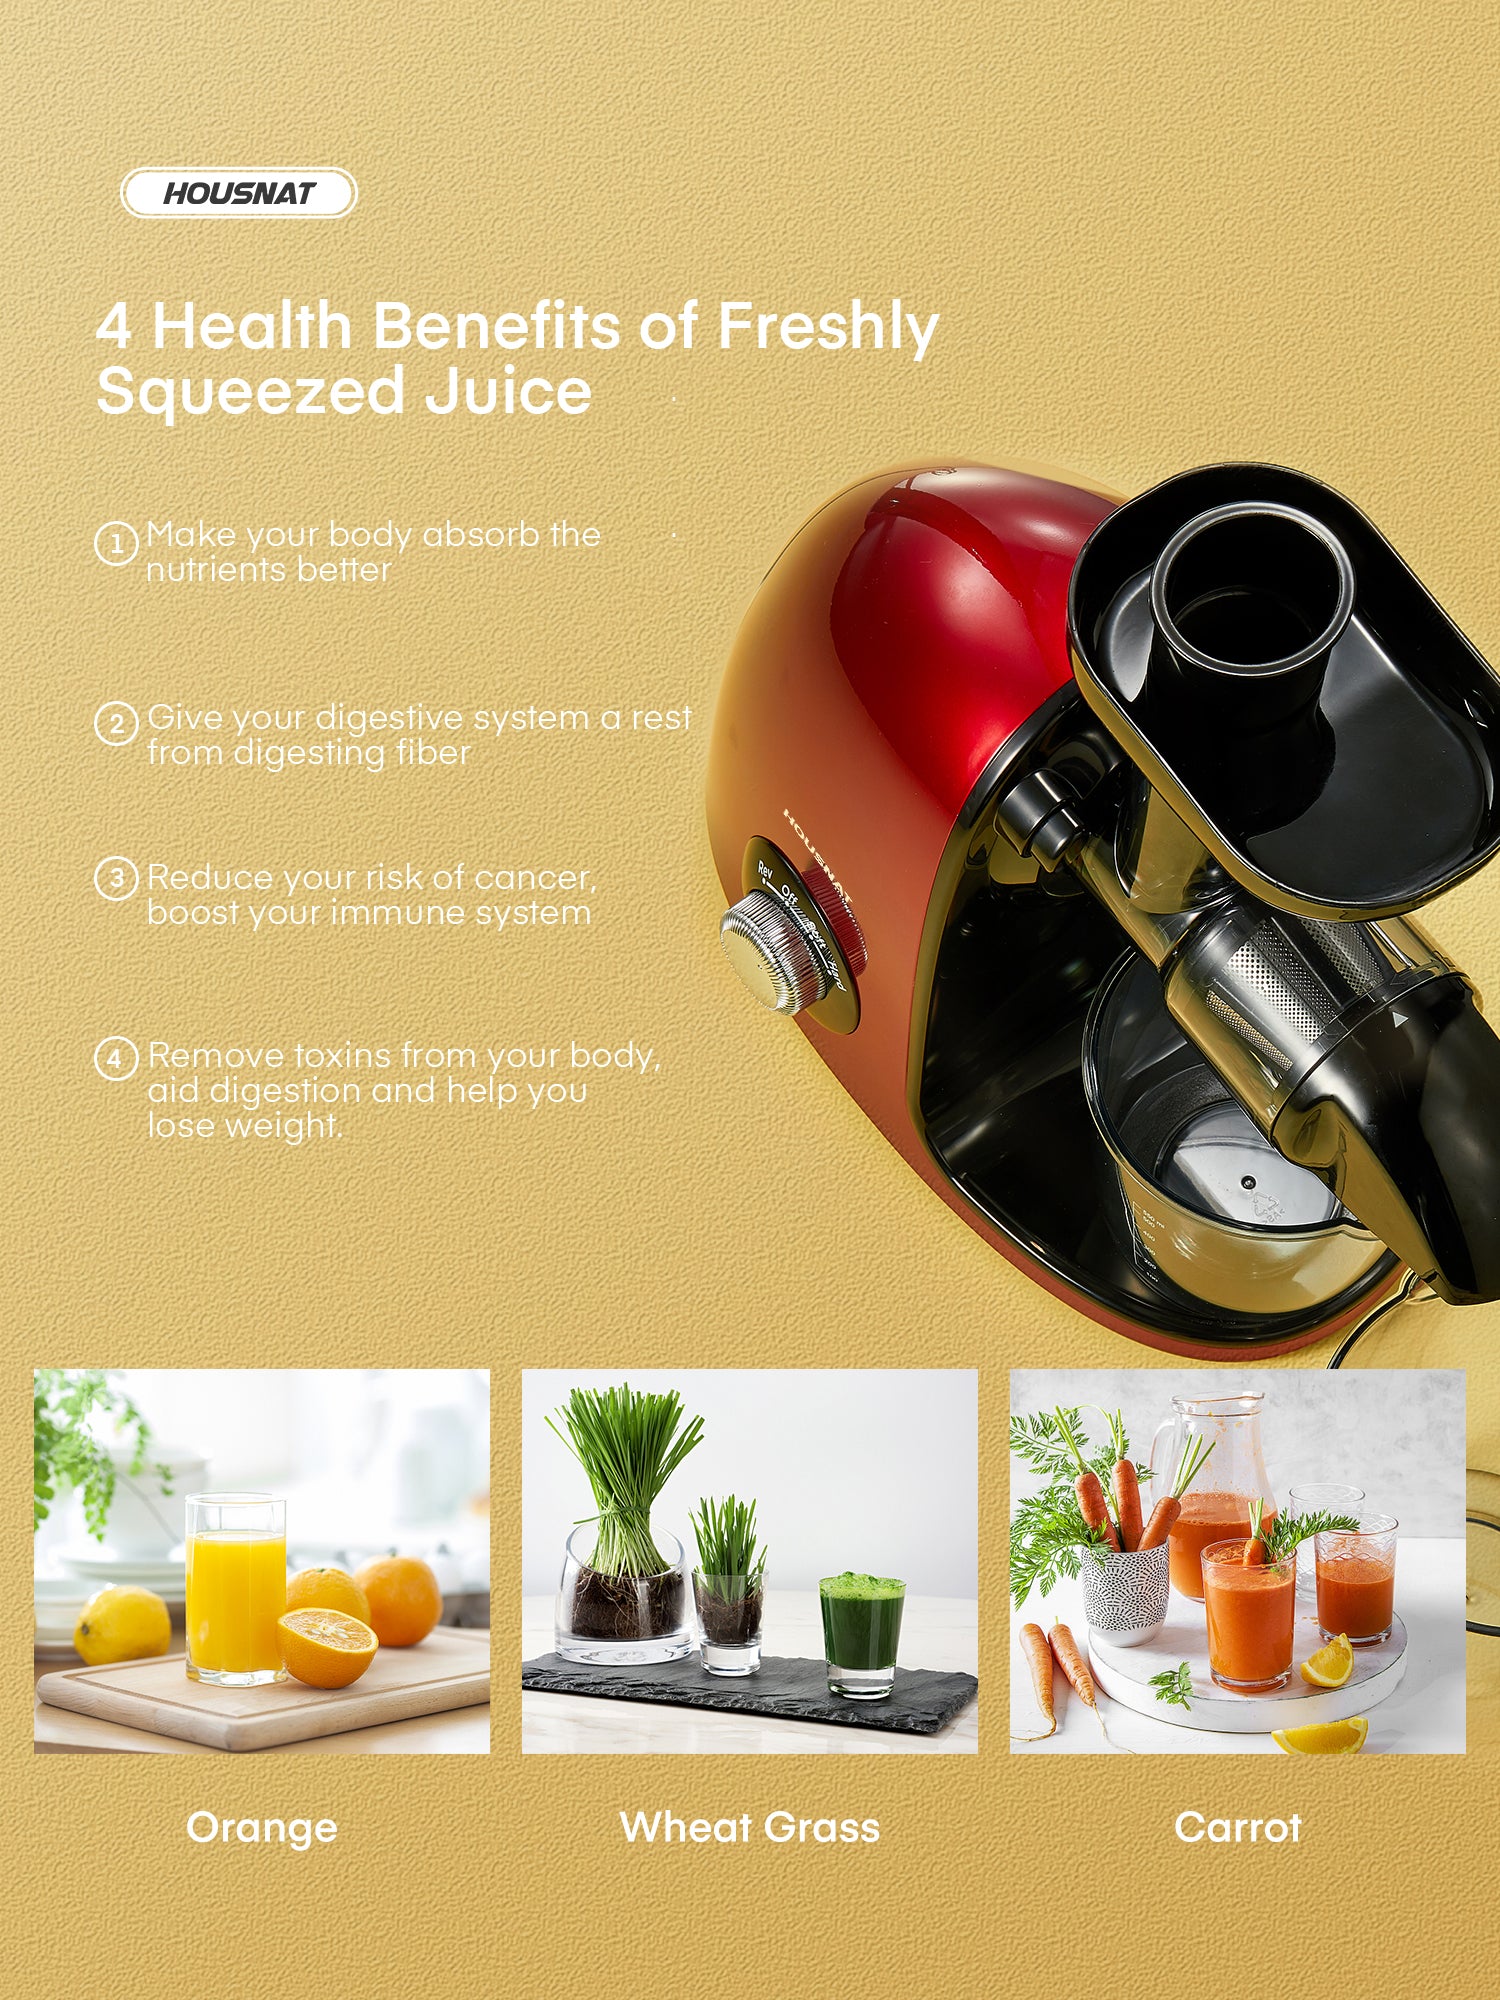 4 health benefits of friendly squeezed juice, Juicer Machines Easy to Clean, HOUSNAT Slow Masticating Juicer with 2-Speed Modes, Cold Press Juicer Extractor for Fruits & Vegetables with Quiet Motor, Reverse Function, Recipes (Passion Red)